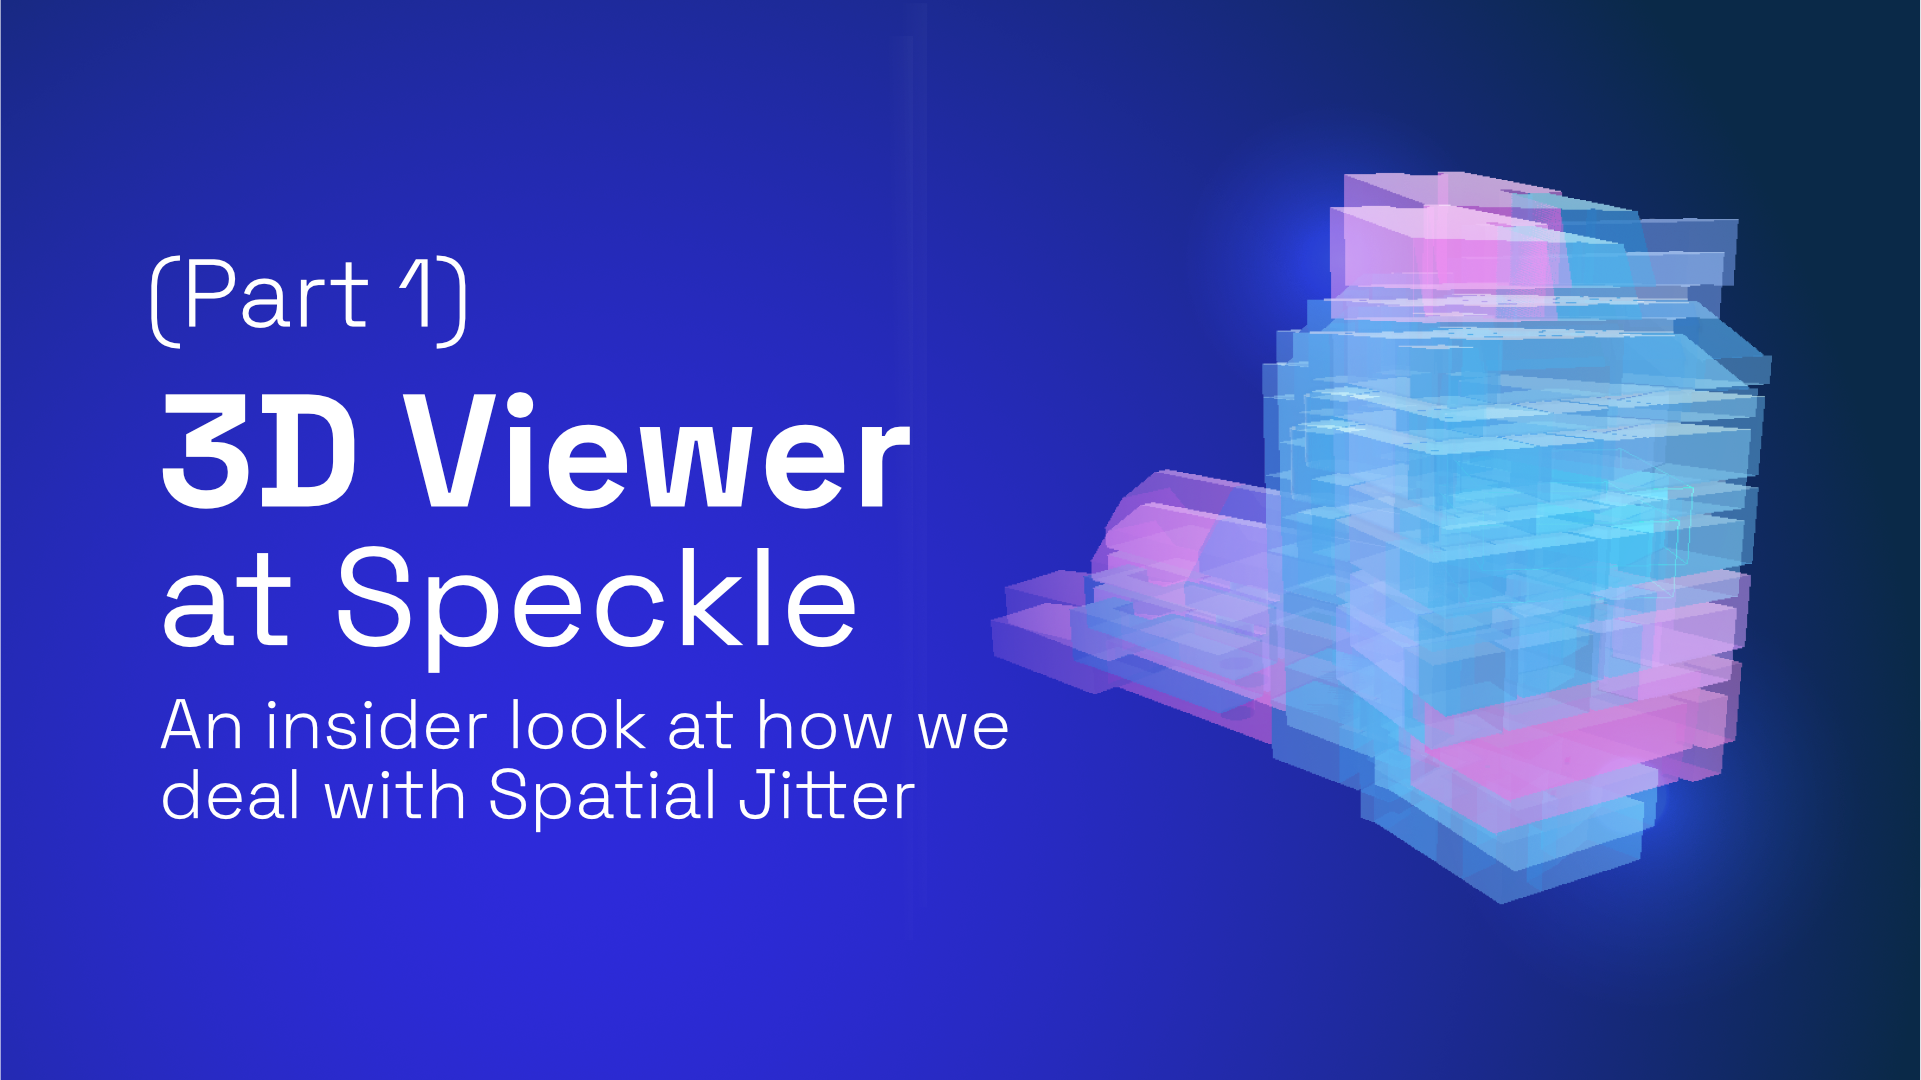 Rendering Dimensionally Large 3D Models in The Browser: Speckle’s Take On Spatial Jitter